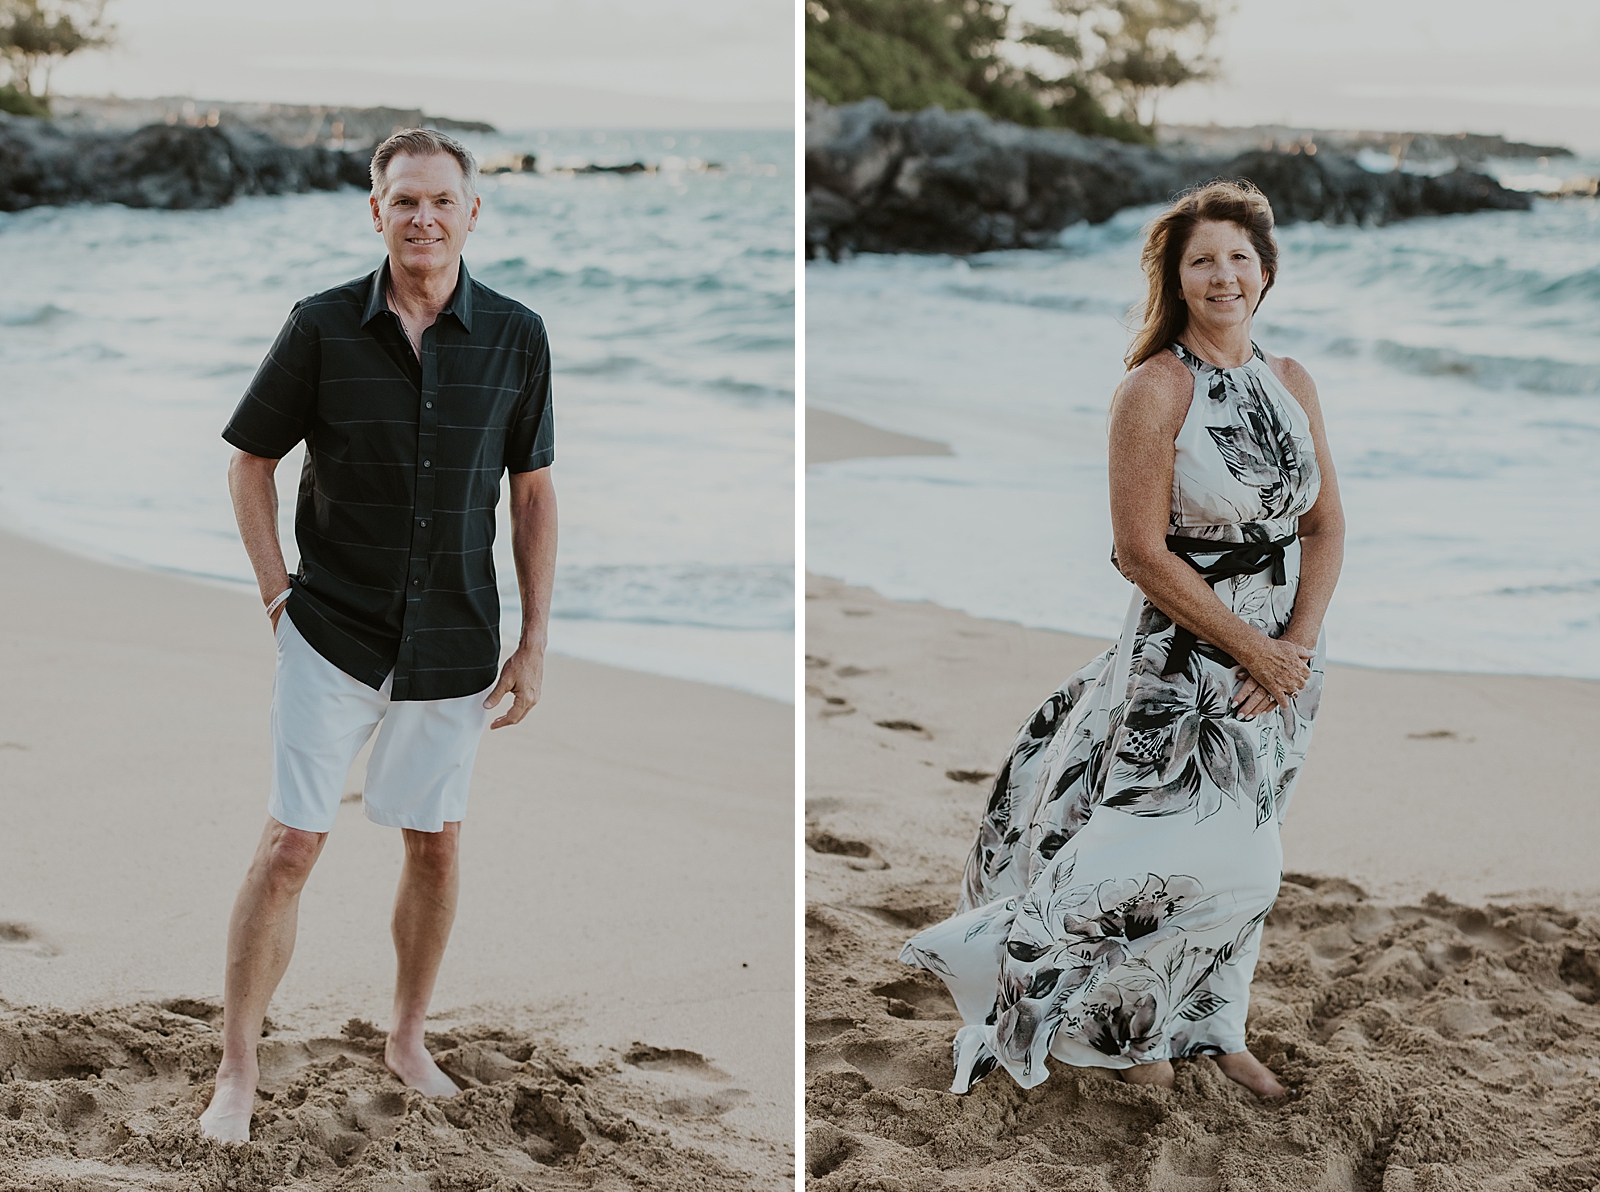 Individual portraits of parents standing on the beach by the ocean